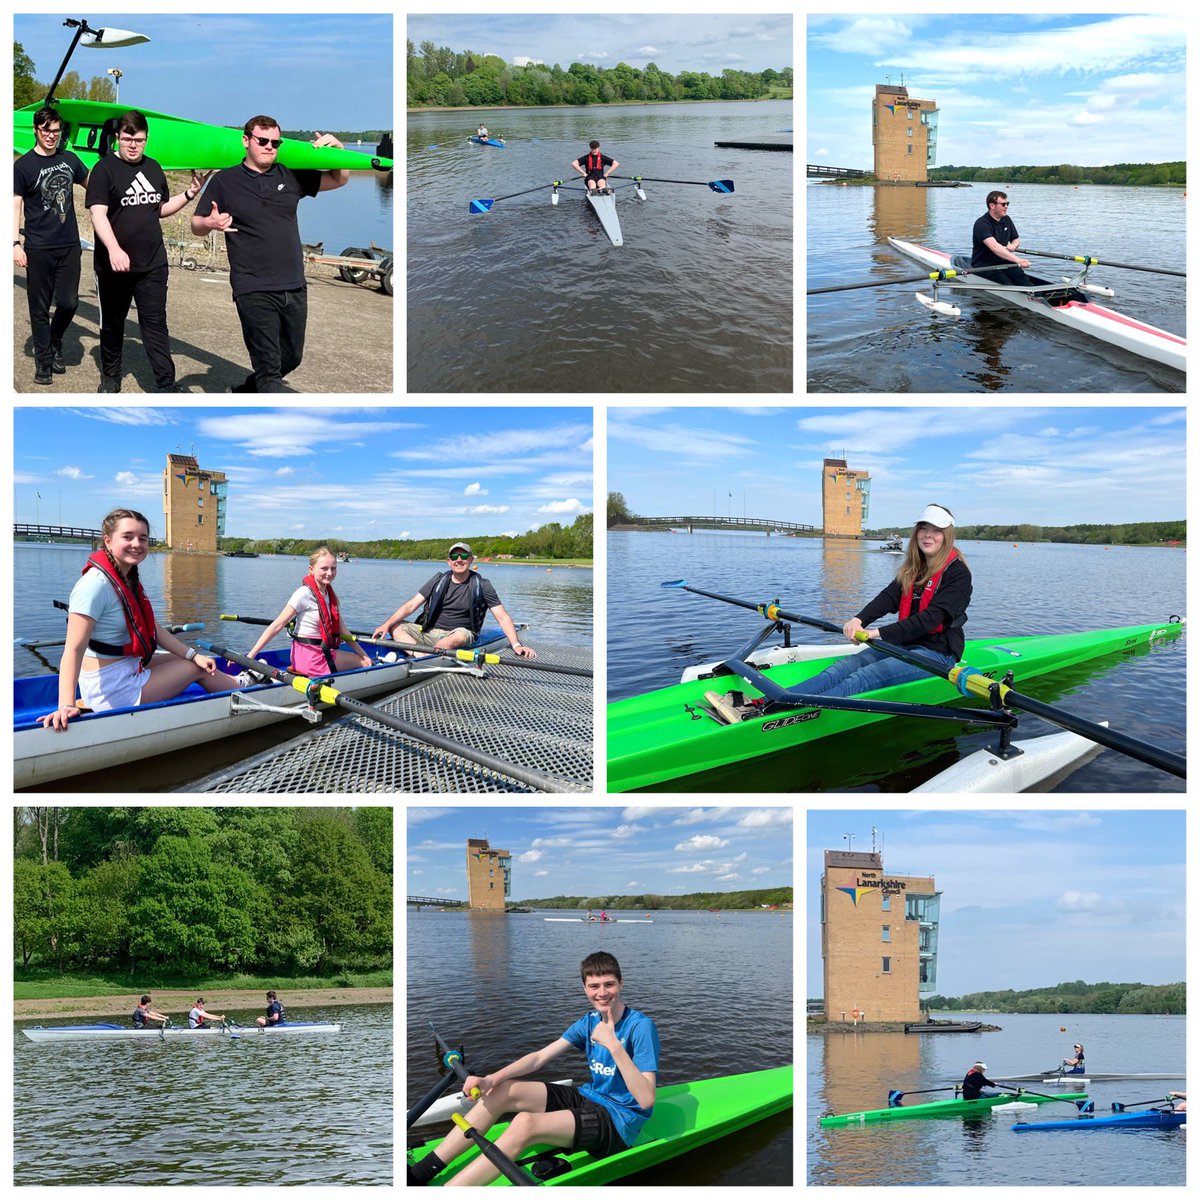 A perfect day of #CommunityRowing with 2 fantastic squads from @FPSMotherwell & @BellshillA All 13 participants made great technical progress whilst having fun in the sun @NLActiveSchools @SP_RC1 @ScottishRowing @active_nl @sportscotland